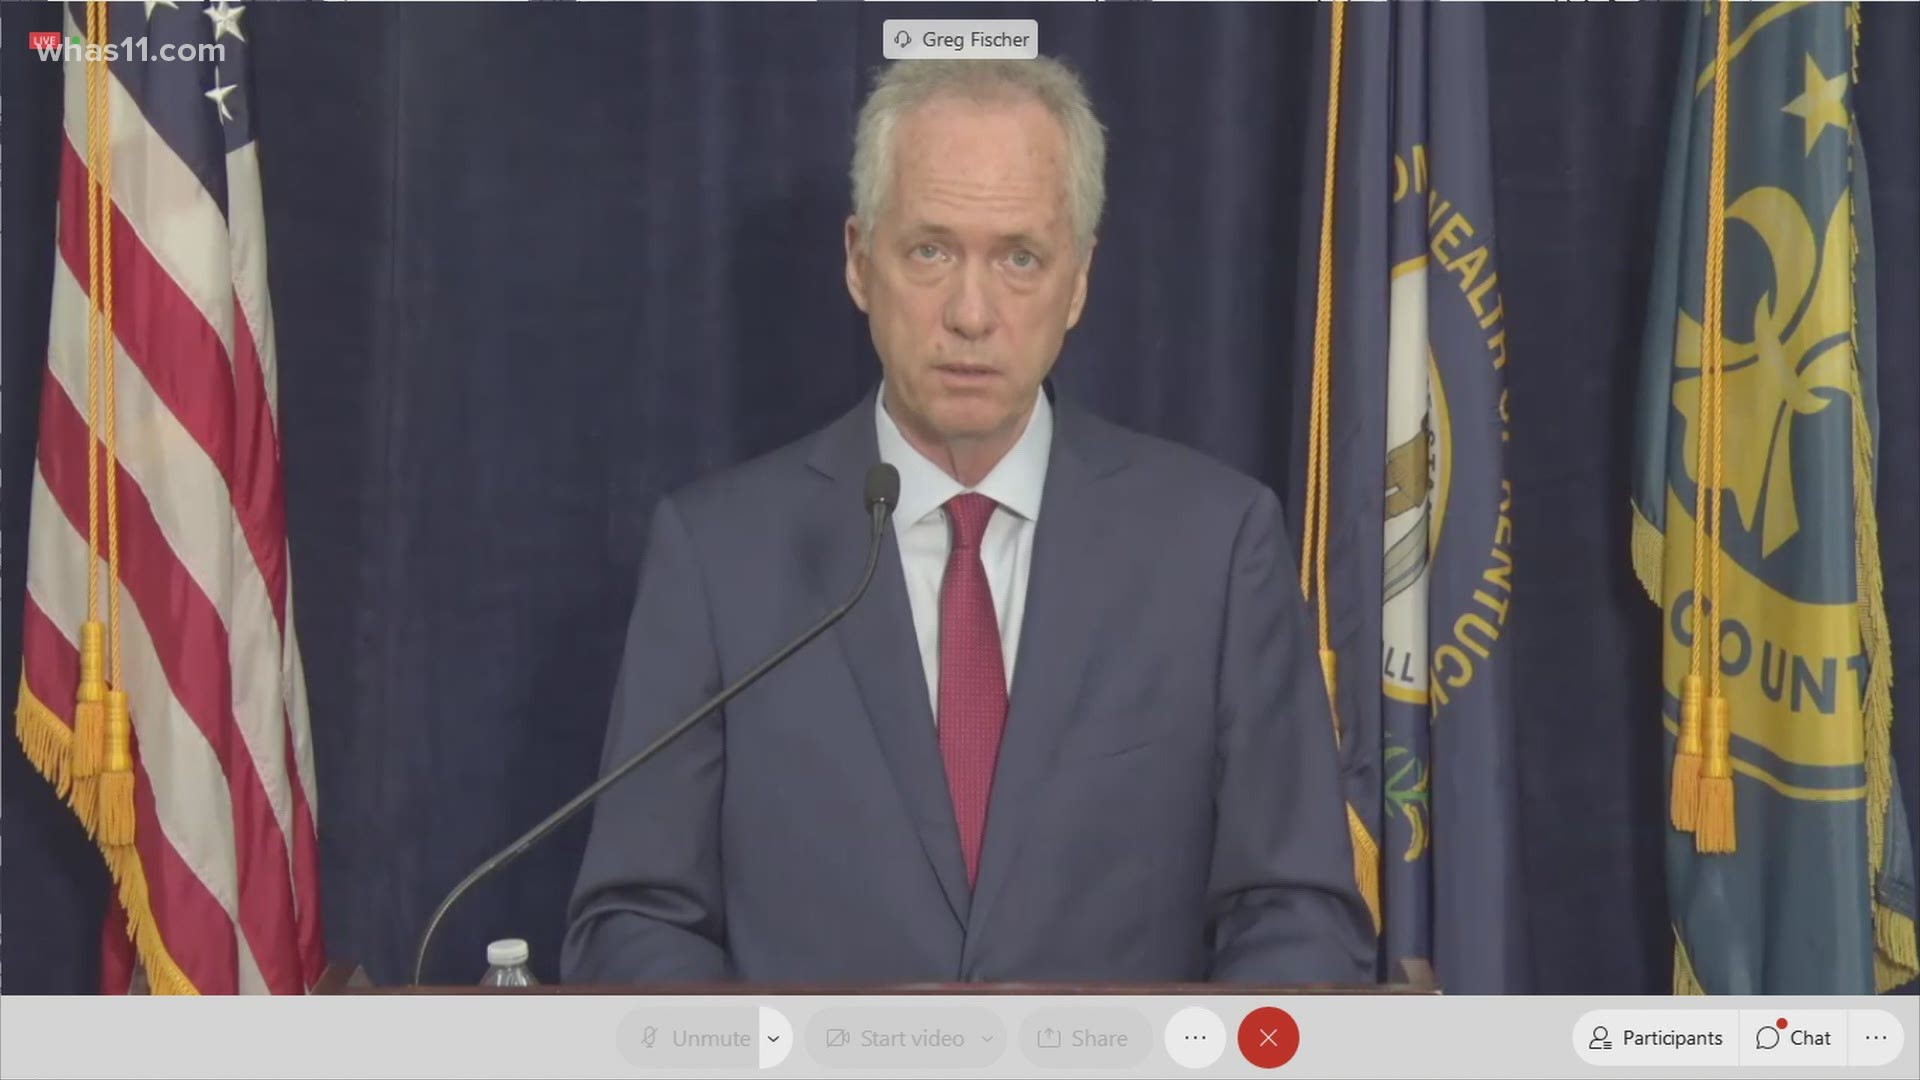 Mayor Greg Fischer called on Louisville turn towards each other, rather than against each other, to shape the city "all Louisvillians deserve."